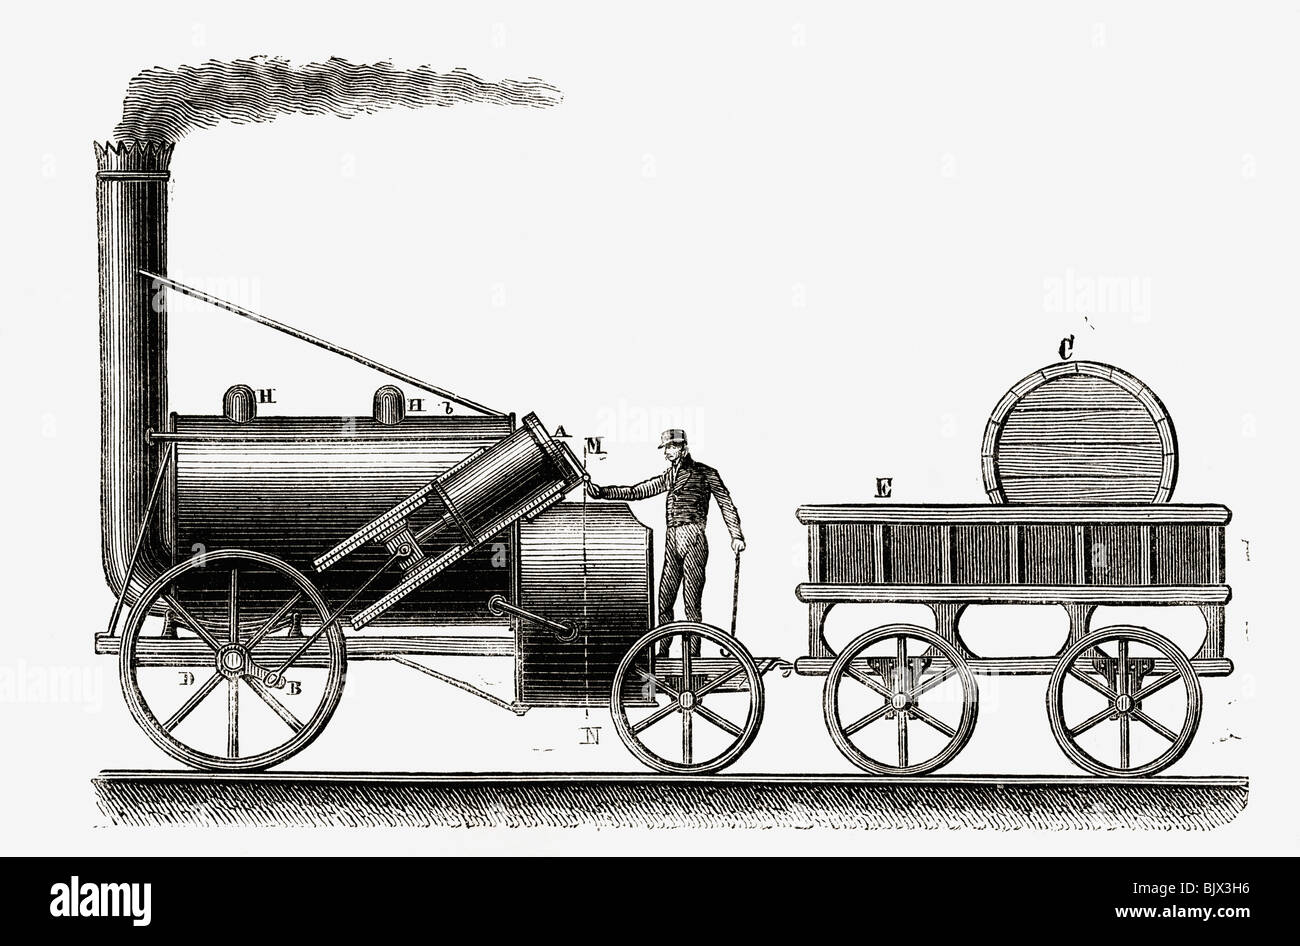 The Rocket. Steam engine partially designed by English engineer George Stephenson, 1781-1848. Stock Photo